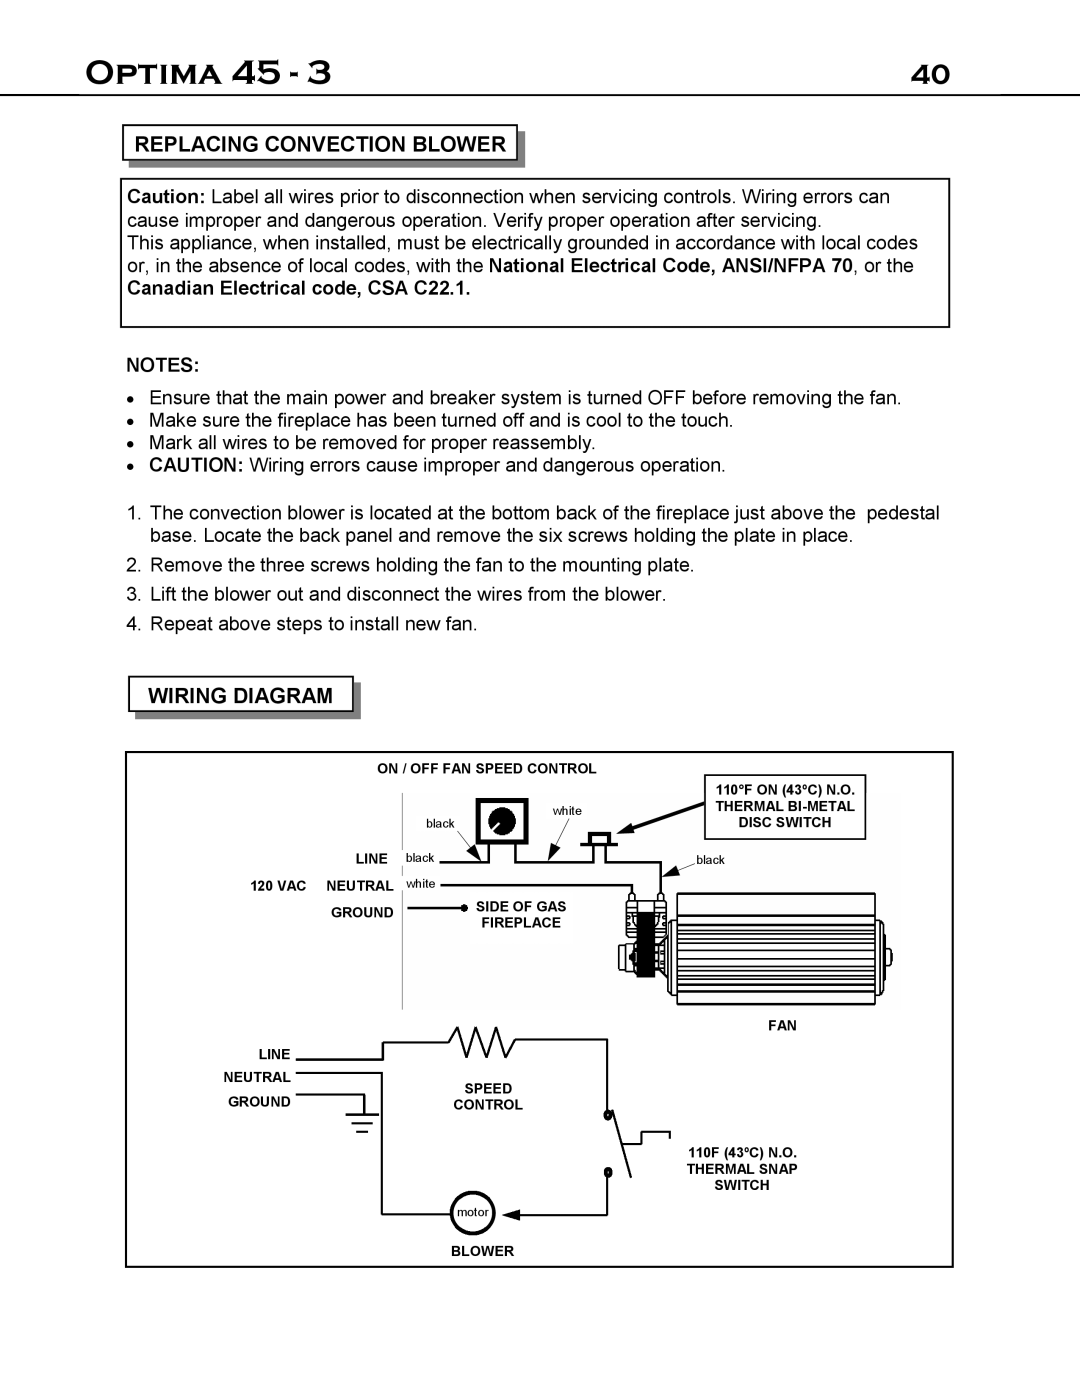 Optima Company 45 - 3 manual Replacing Convection Blower, Wiring Diagram, Optima, Canadian Electrical code, CSA C22.1 NOTES 